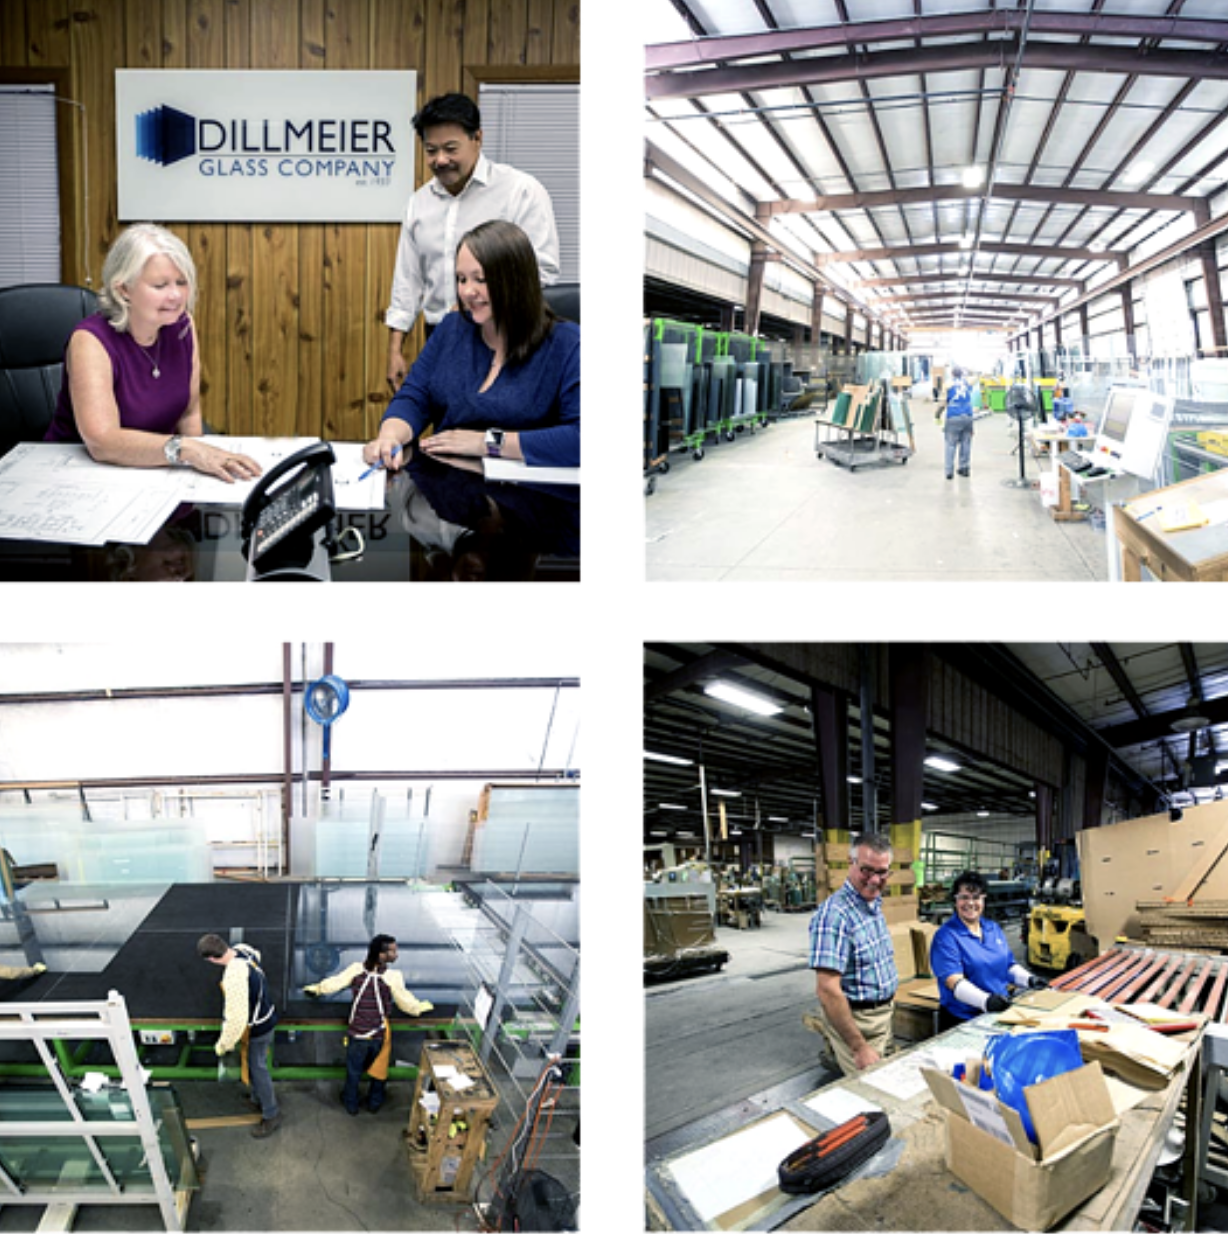 Collage of Dillmeier employees, office and warehouse